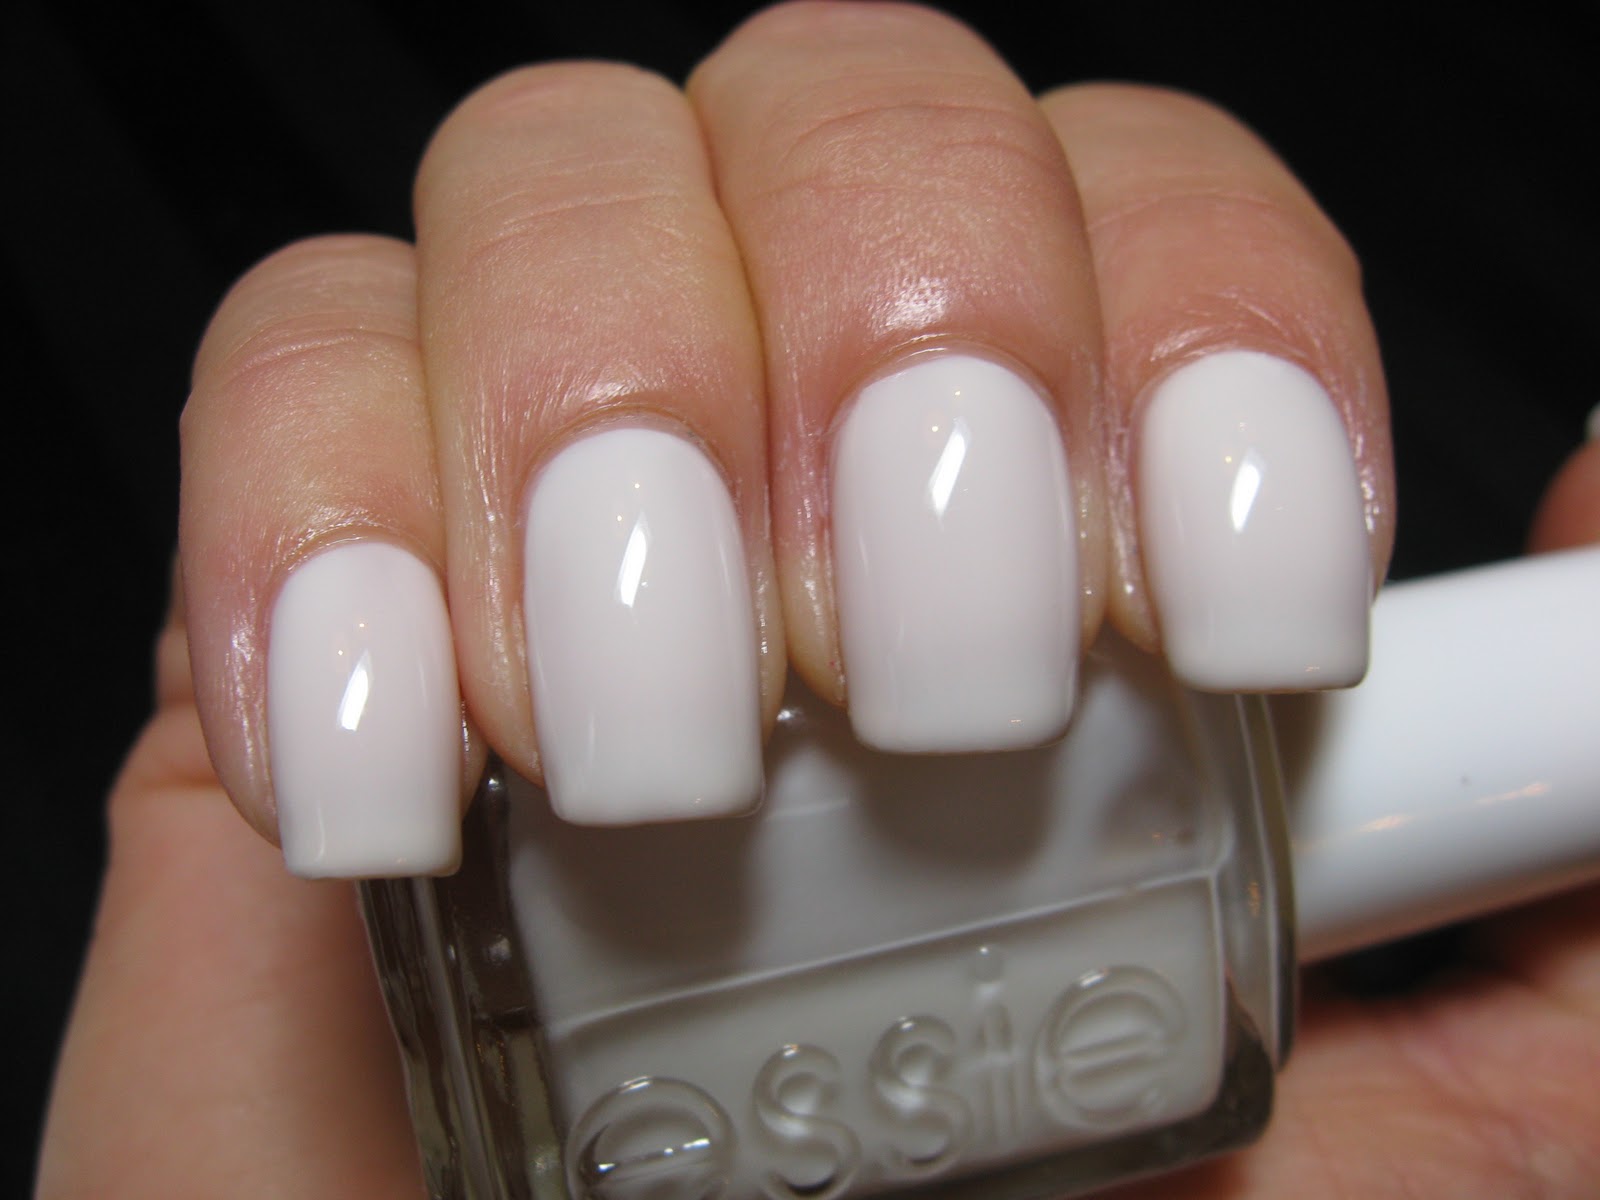 7. Orly Nail Lacquer in "White Tips" - wide 6